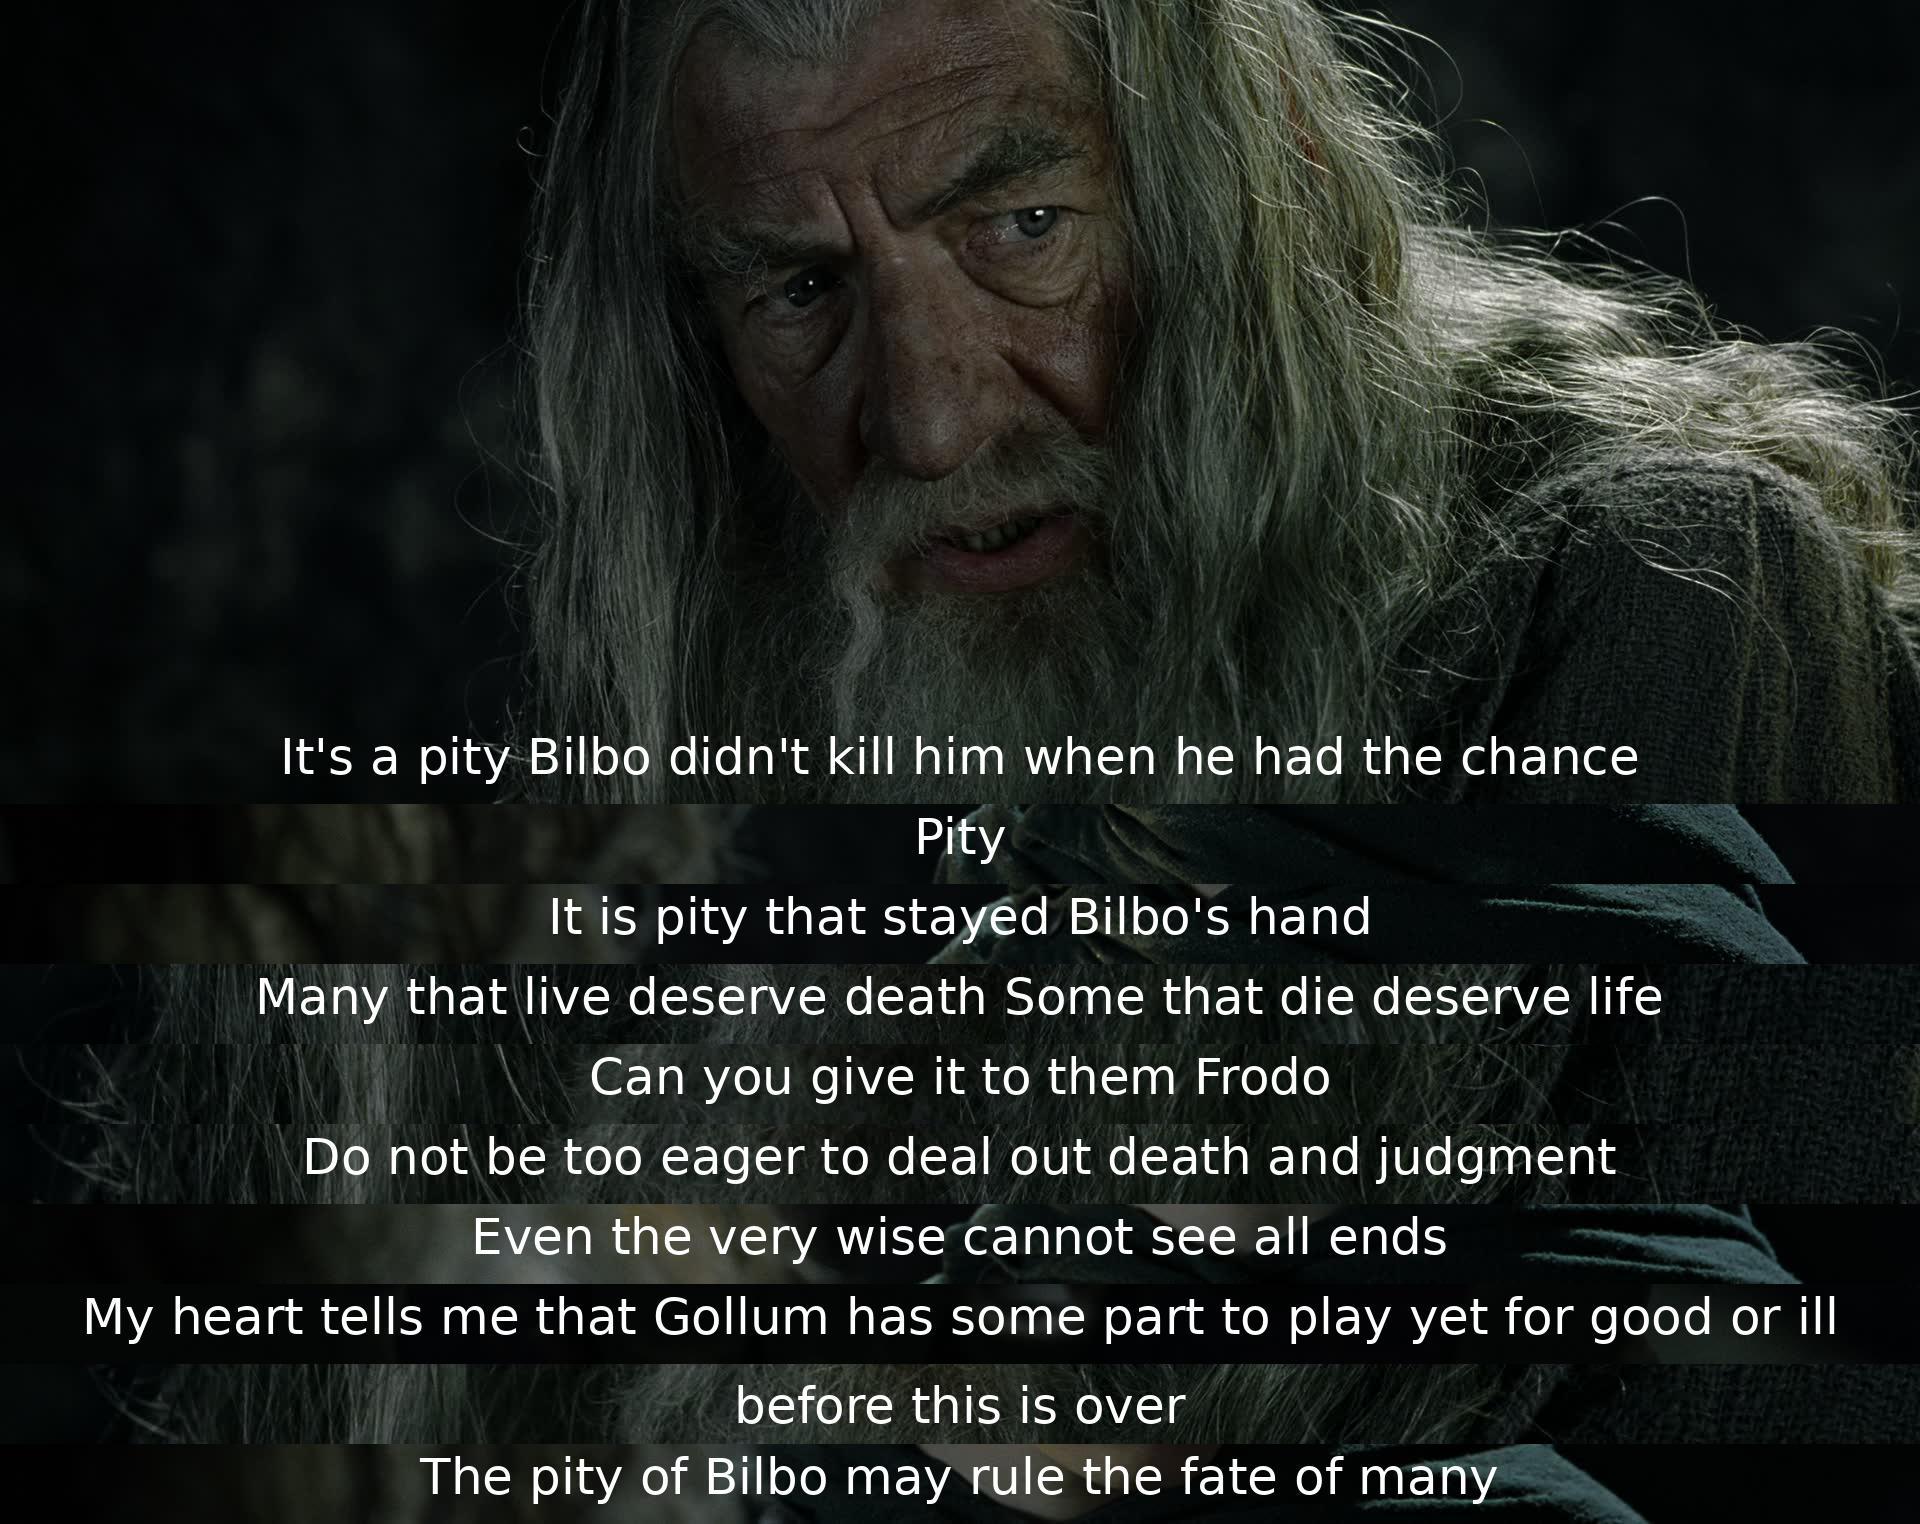 Regret is expressed for not eliminating Gollum. Choosing between life and death challenges Frodo, advised against hastiness in judgment. Gollum's future impact, whether good or bad, is pondered. Bilbo's past mercy may prove crucial in shaping destinies.